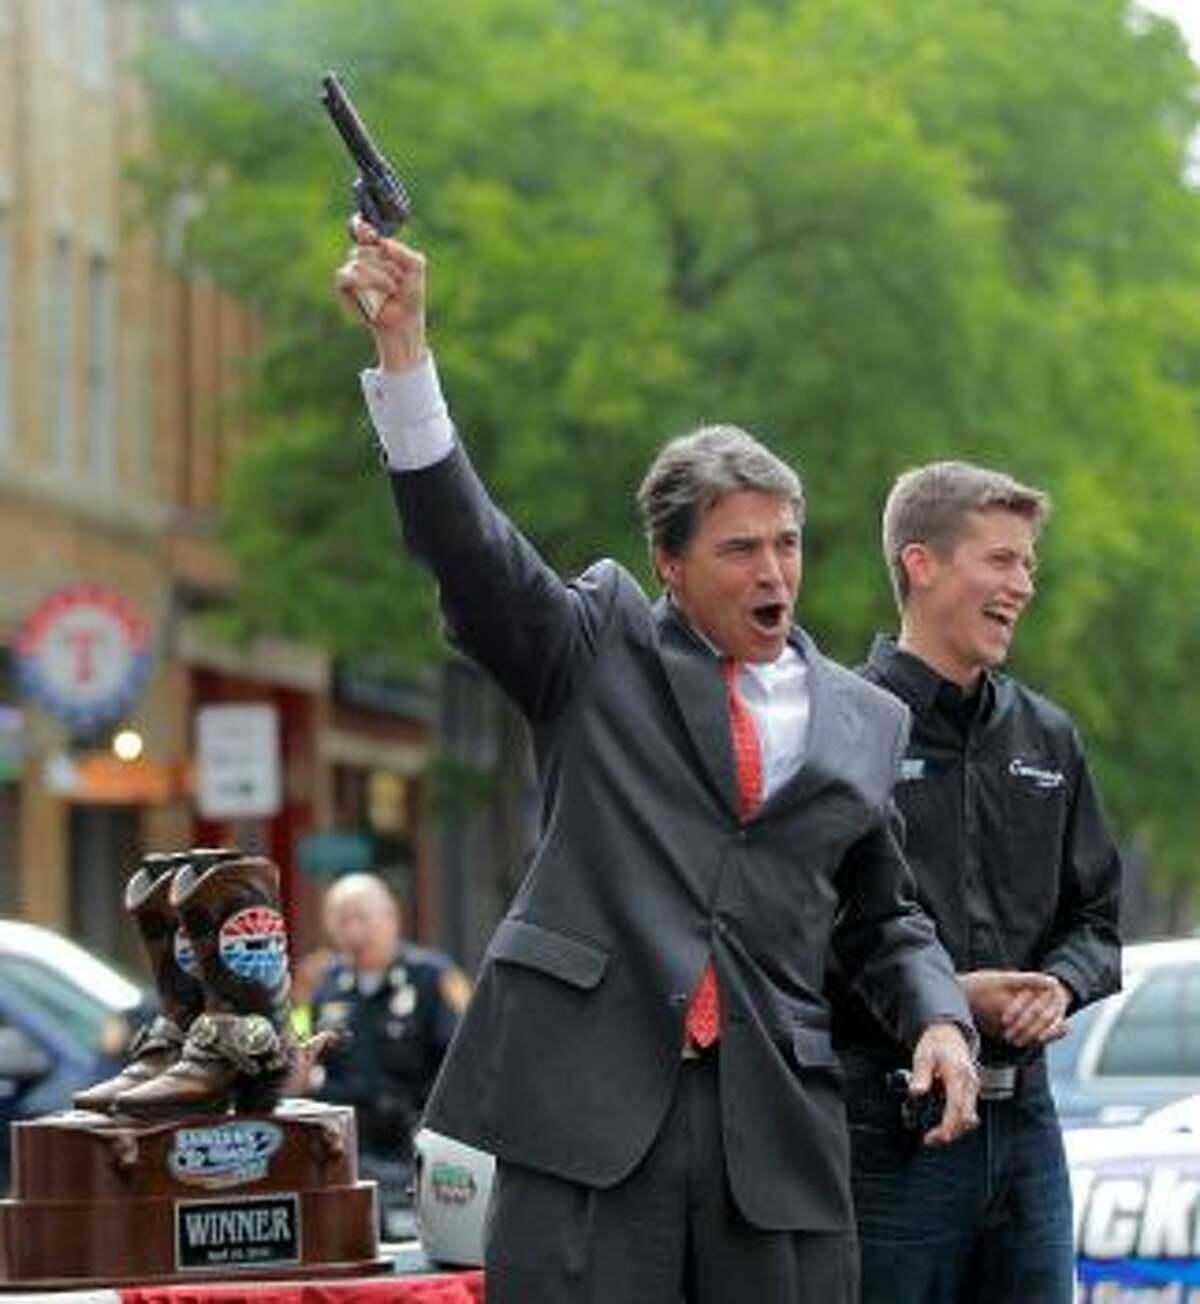 None too shy of appearing at Tea Party rallies, Gov. Rick Perry, R-Texas, has recently been making trips across the US in an attempt to attract out-of-state business to Texas. Prior to his failed presidential bid in 2012, Perry ruffled feathers when he alluded to Texas seceding from the Union.